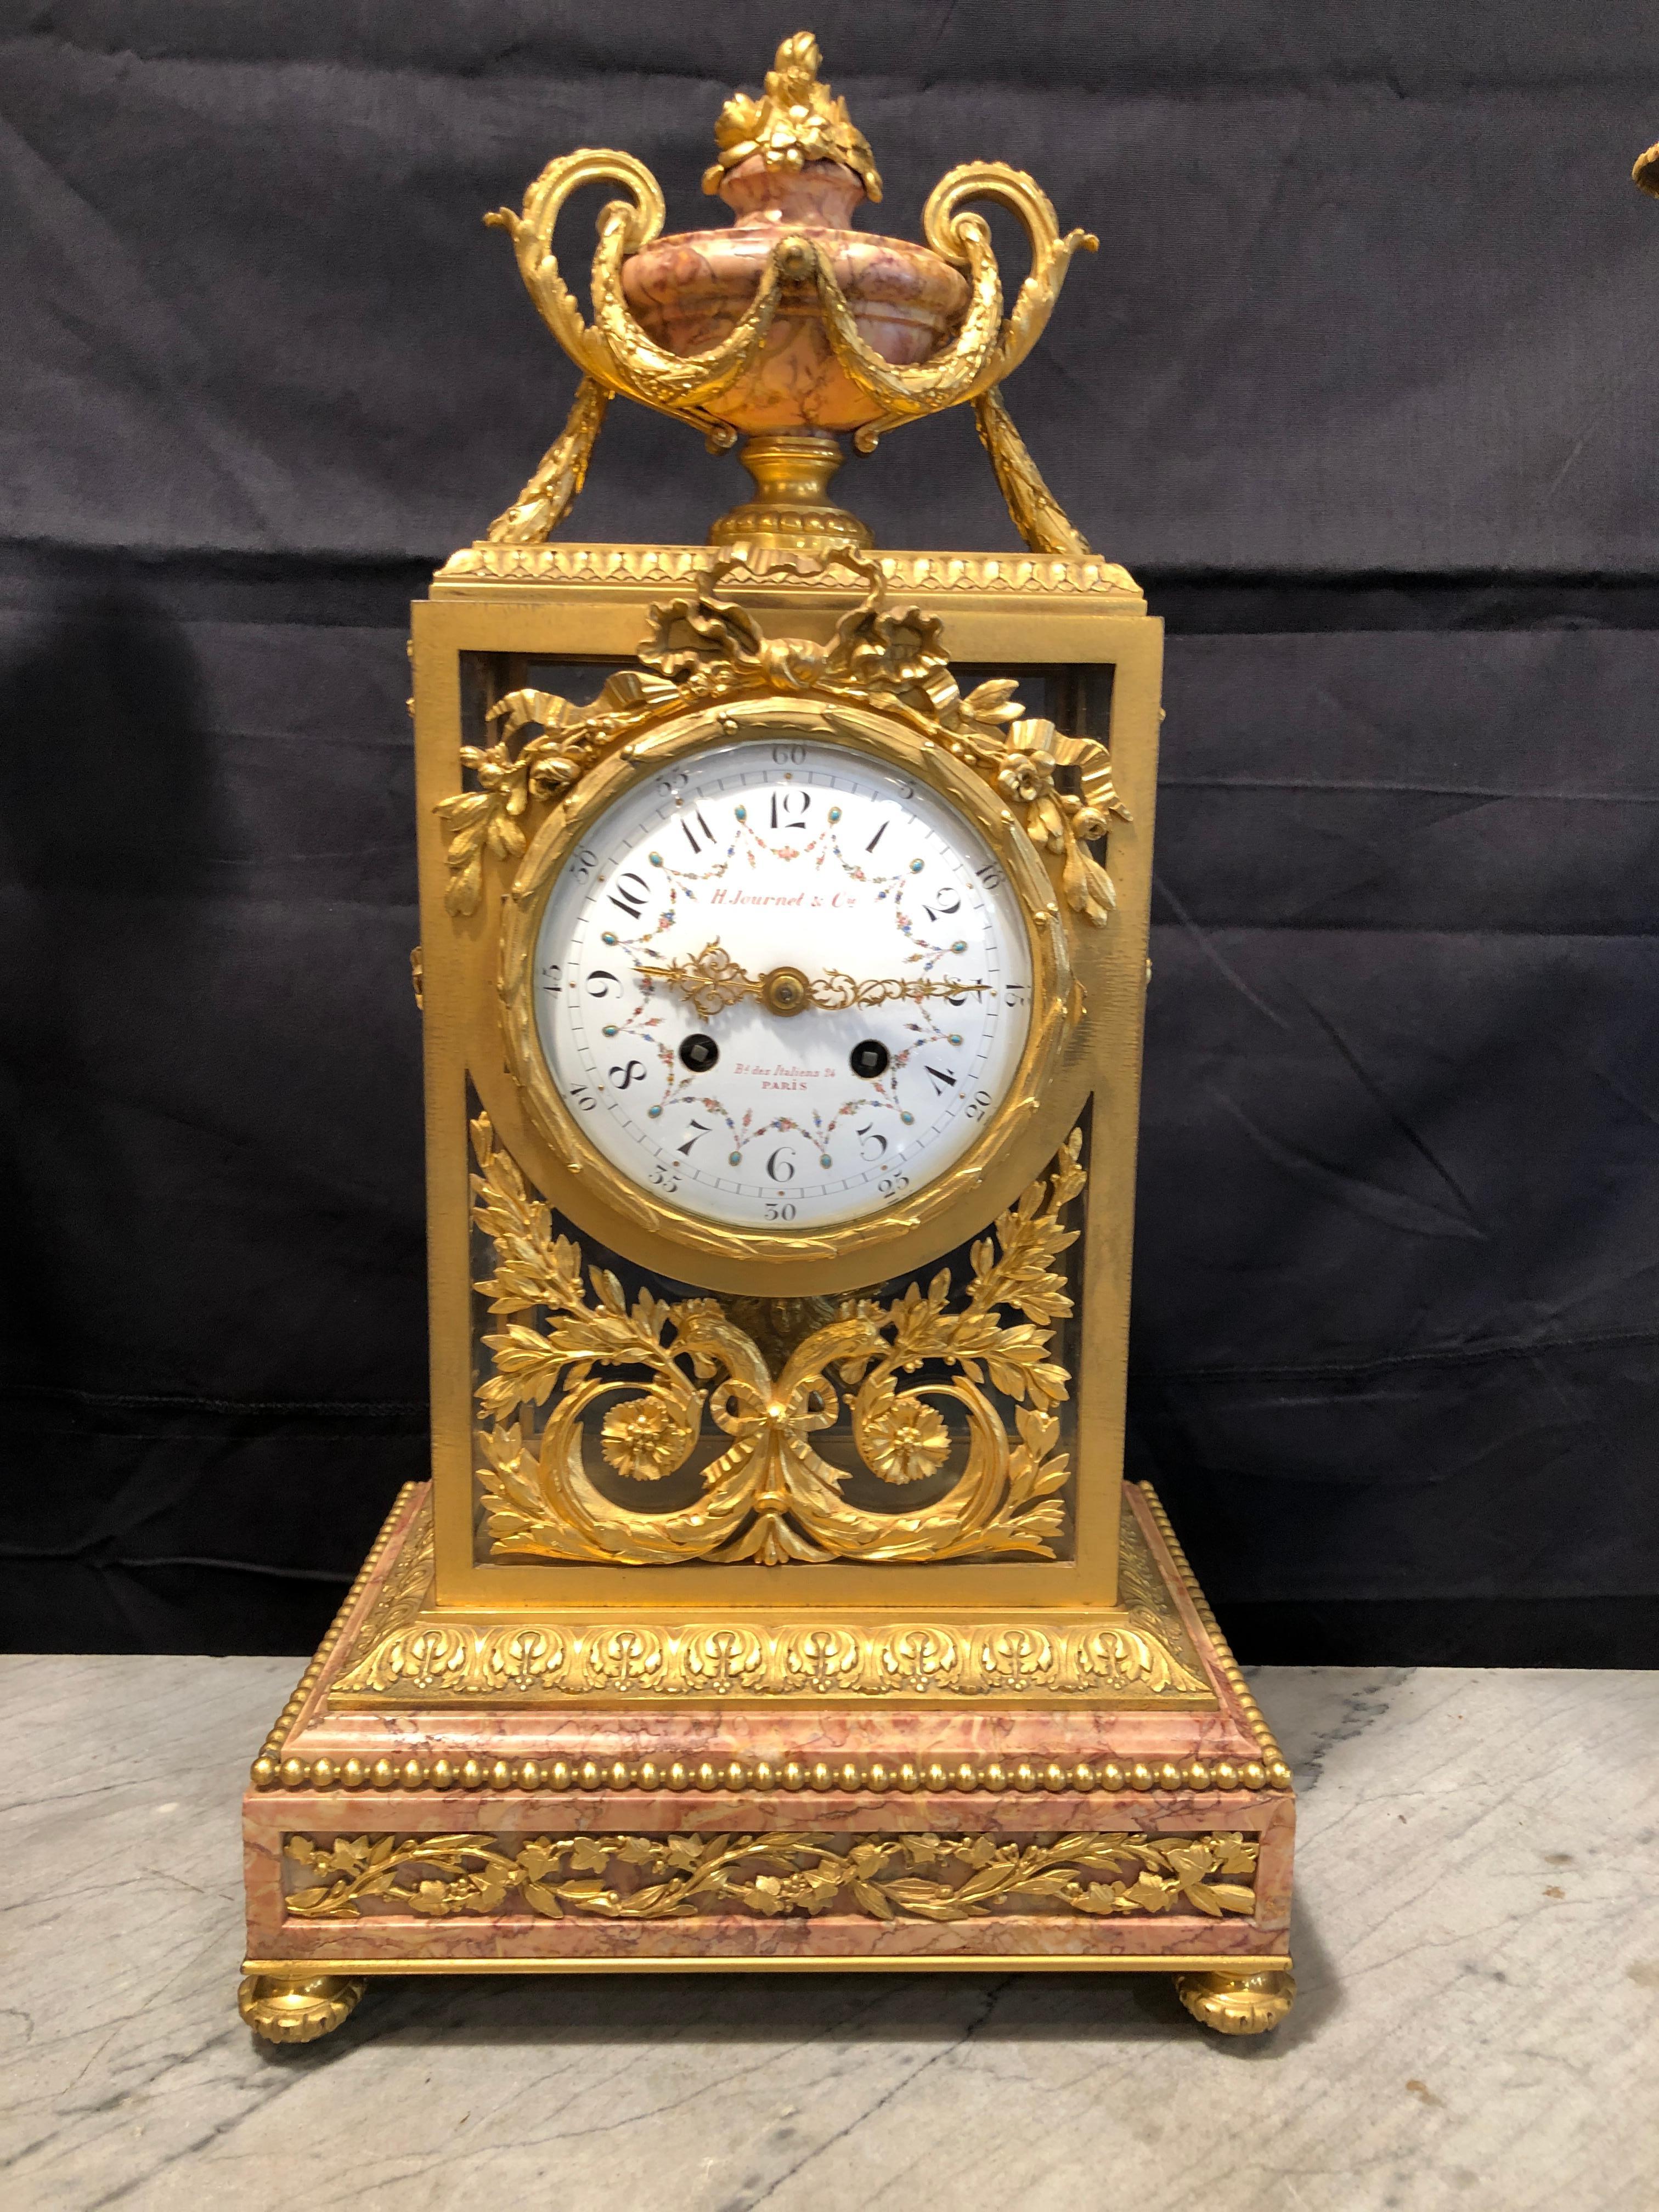 Fantastic example of France mantel clock, superb quality of chisel and fusion of bronzes, marble with incredible veins ... H. Journet & Cie B_d des Italiens 24, Paris. Clock with pendulum in sight, the bronze is placed on a bronze weave that lets